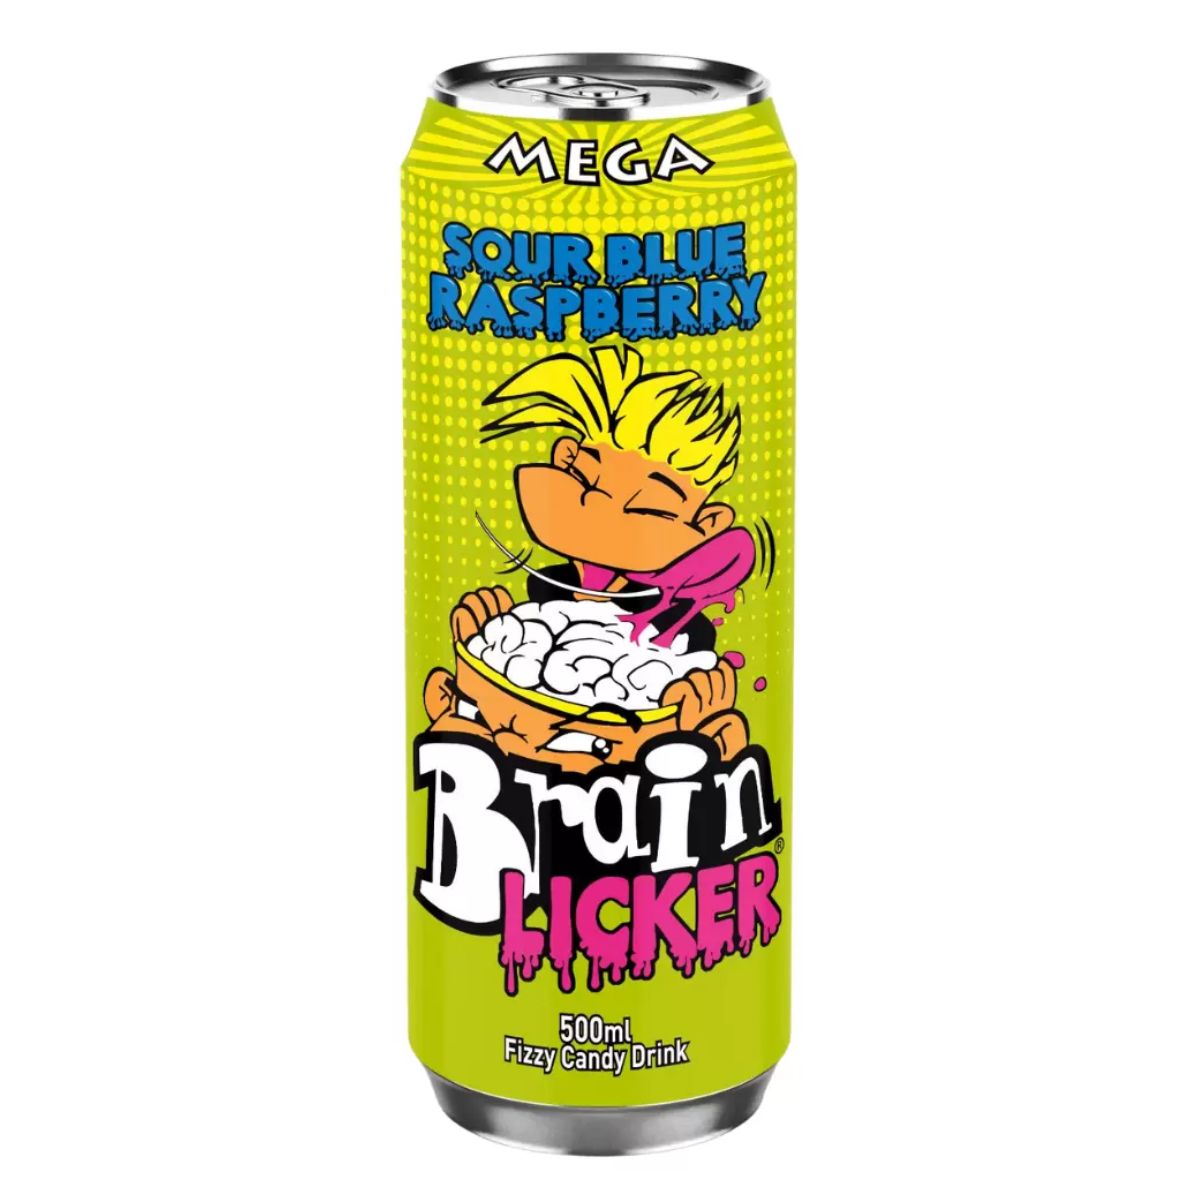 A can of Brain Licker - Sour Blue Raspberry Fizzy Drink - 500ml with a cartoon character on it.